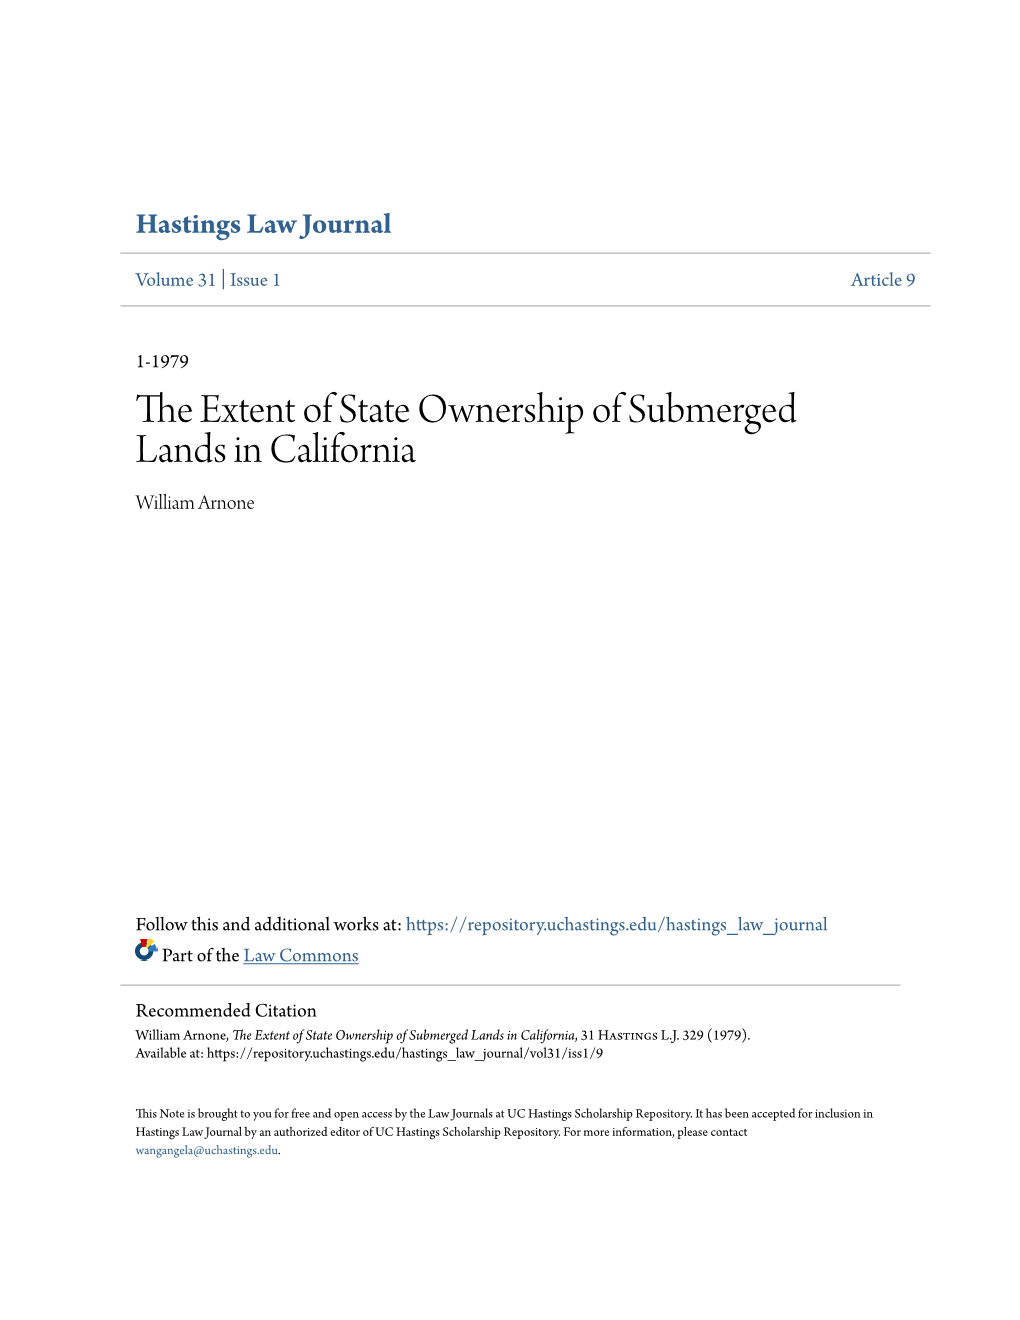 The Extent of State Ownership of Submerged Lands in California William Arnone